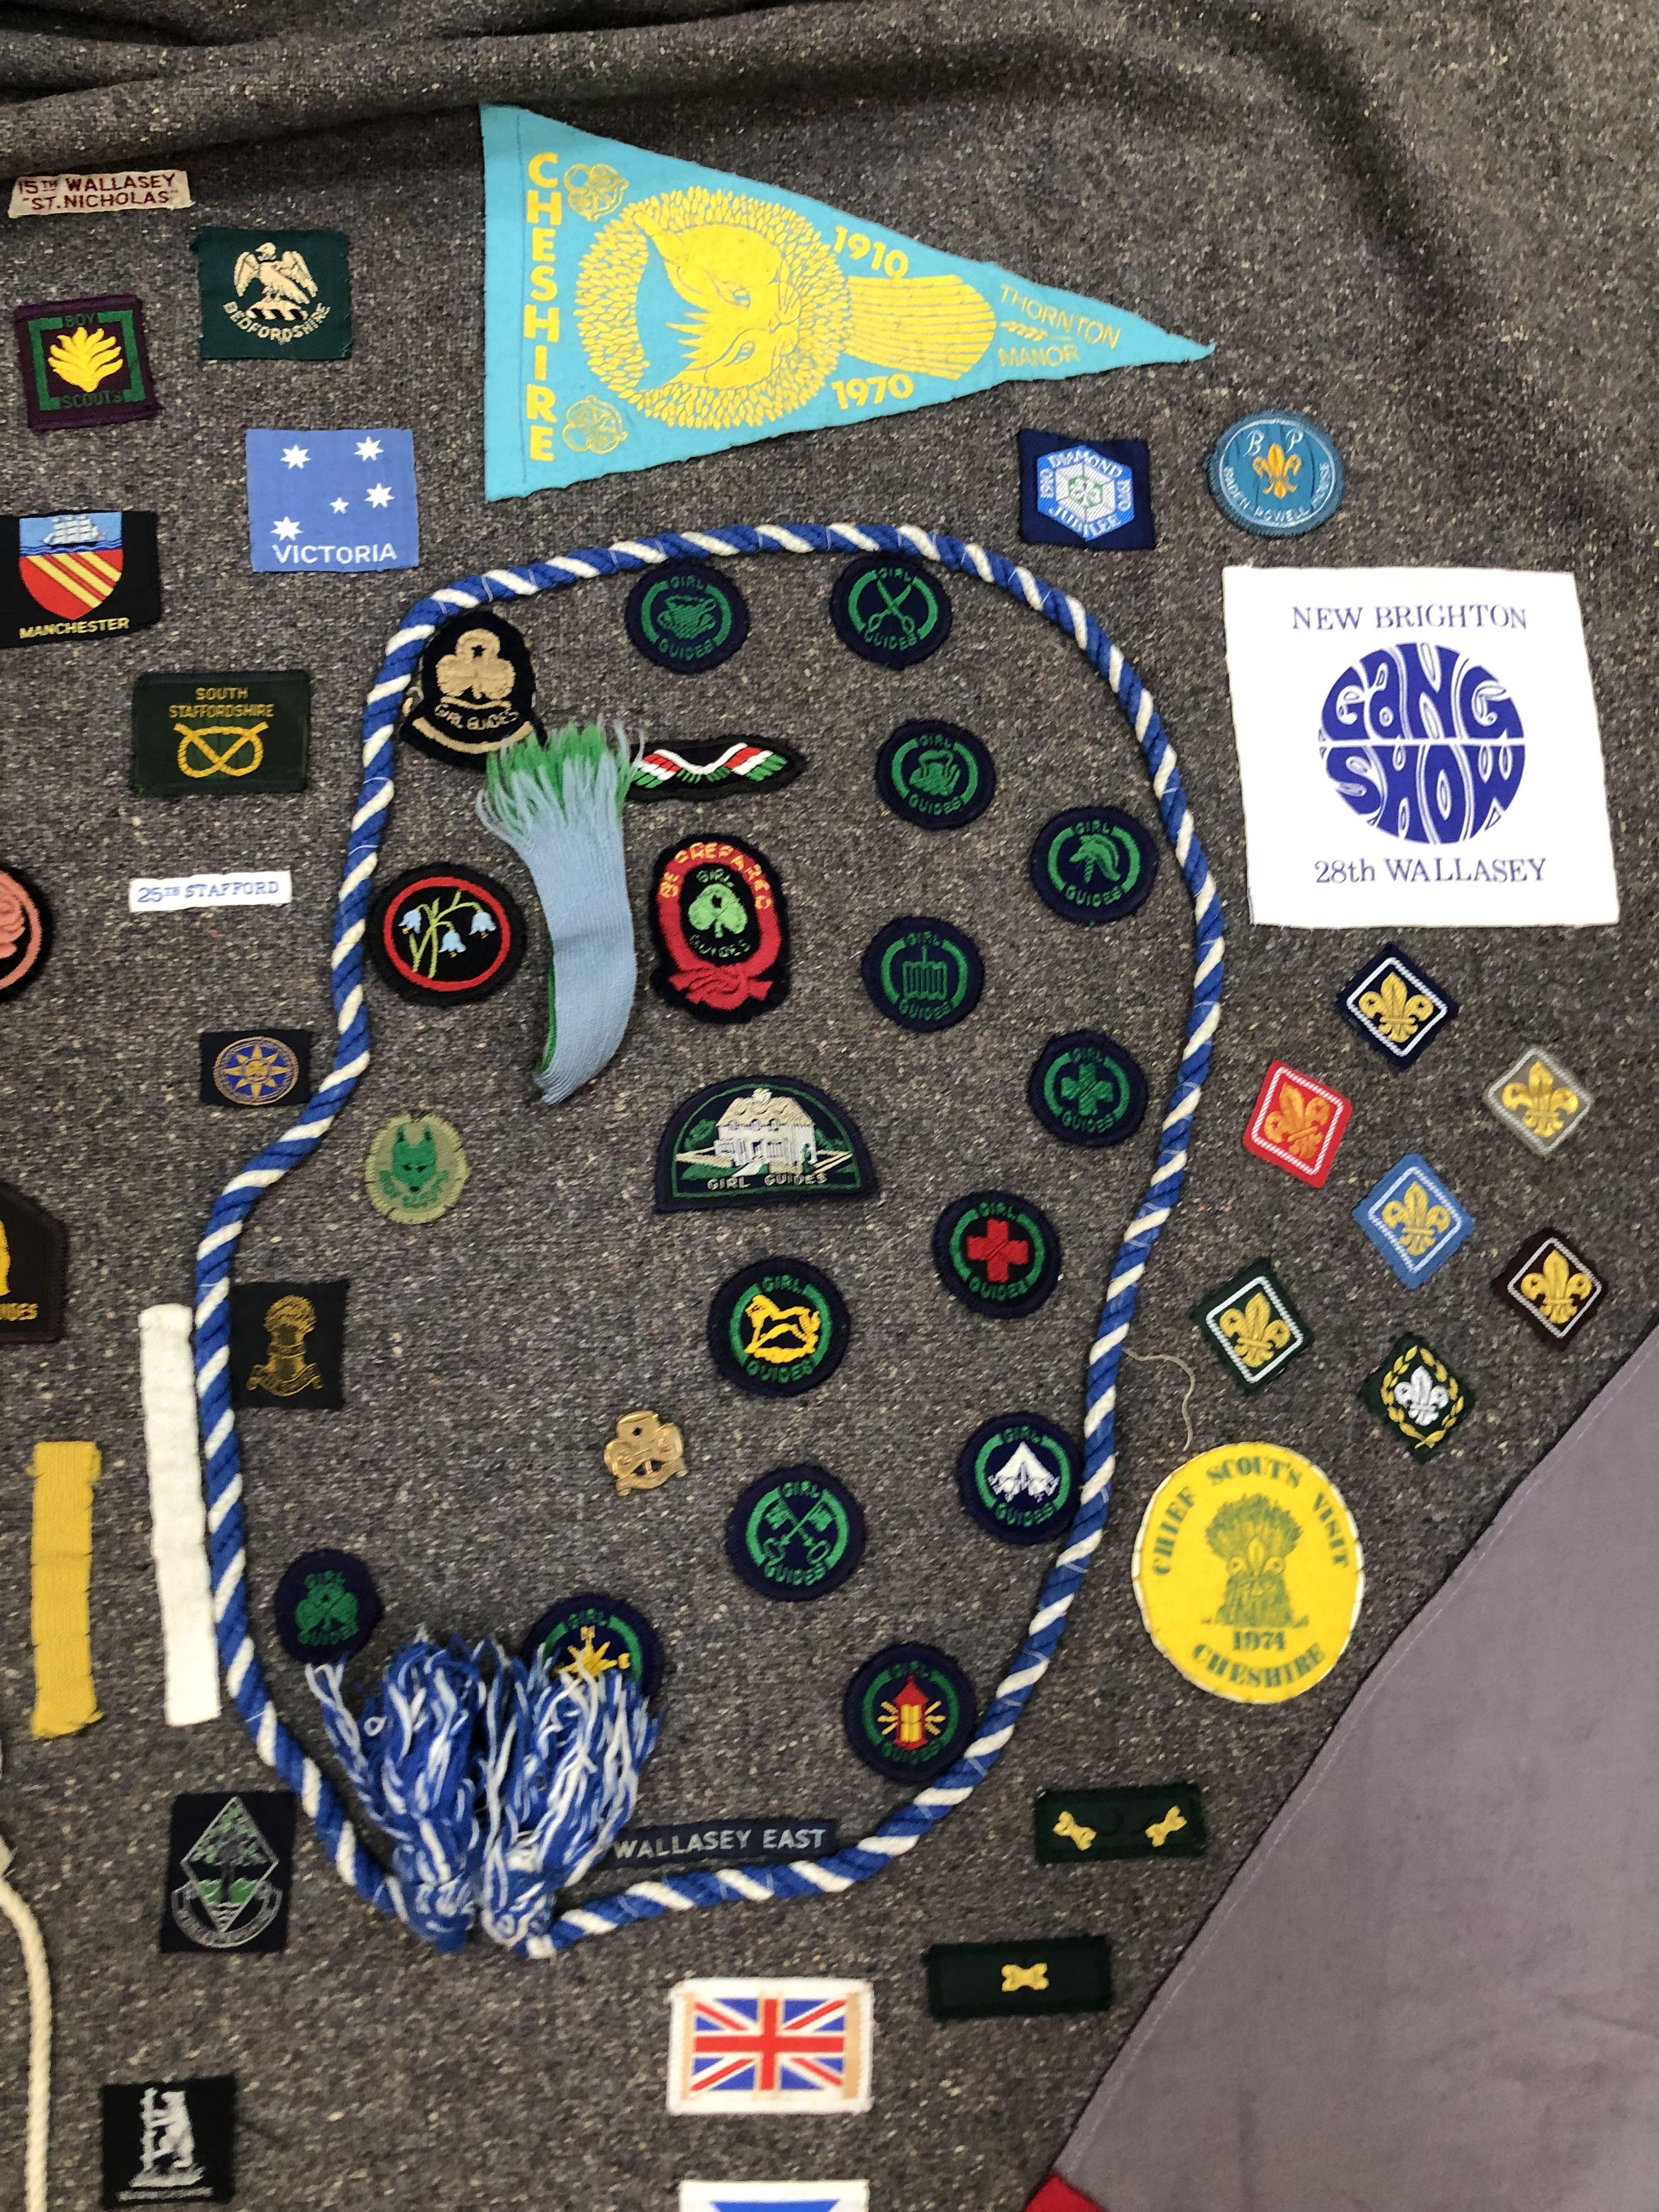 A GIRL GUIDE BLANKET WITH VINTAGE BADGES AND MEMORABILIA - Image 5 of 6